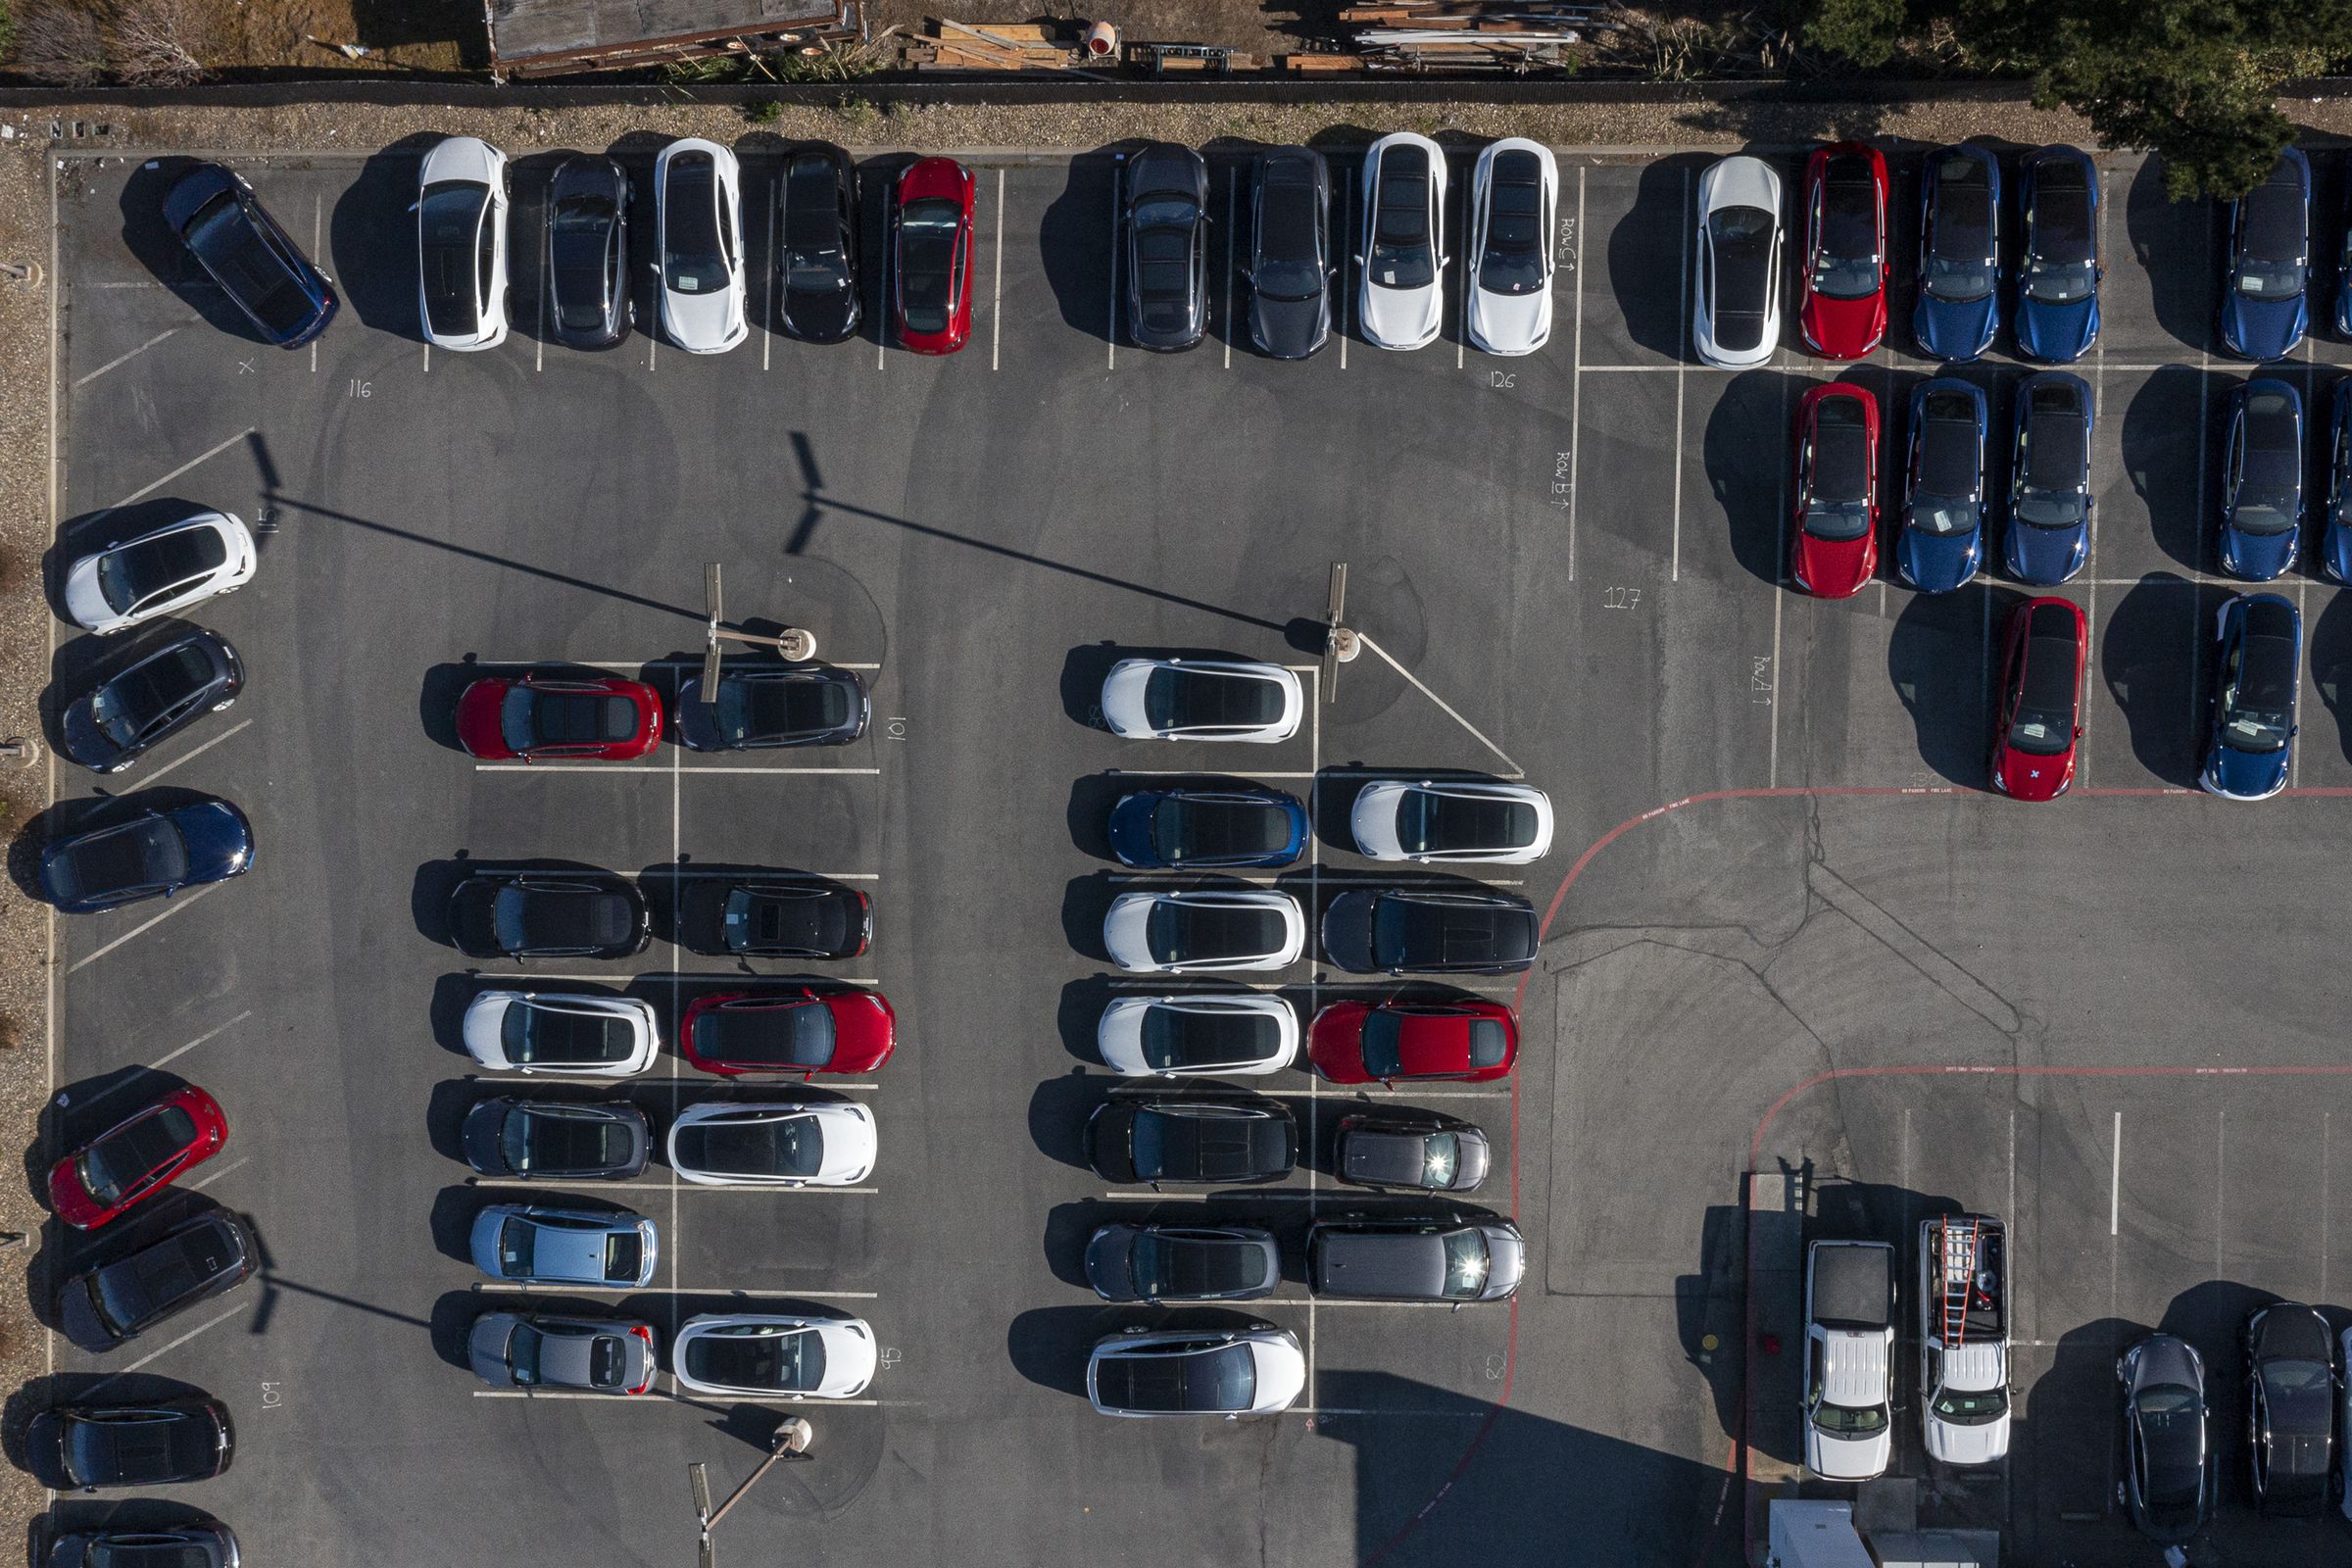 Tesla vehicles in a parking lot